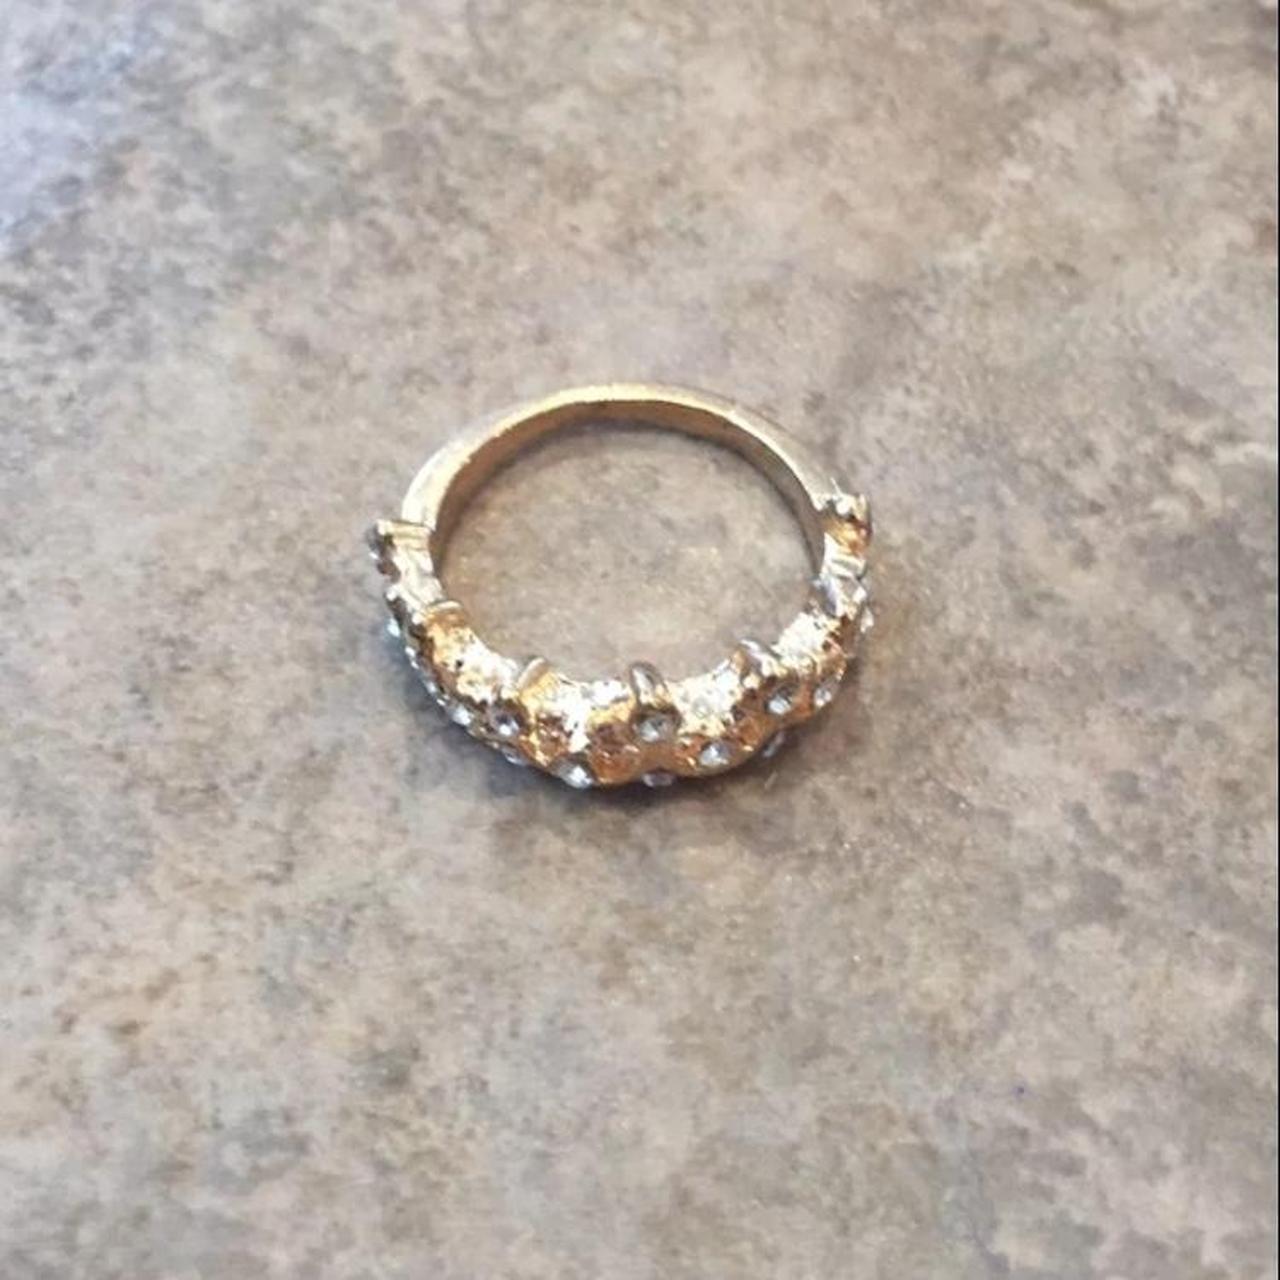 Product Image 3 - Gold crown ring size 5
Condition: